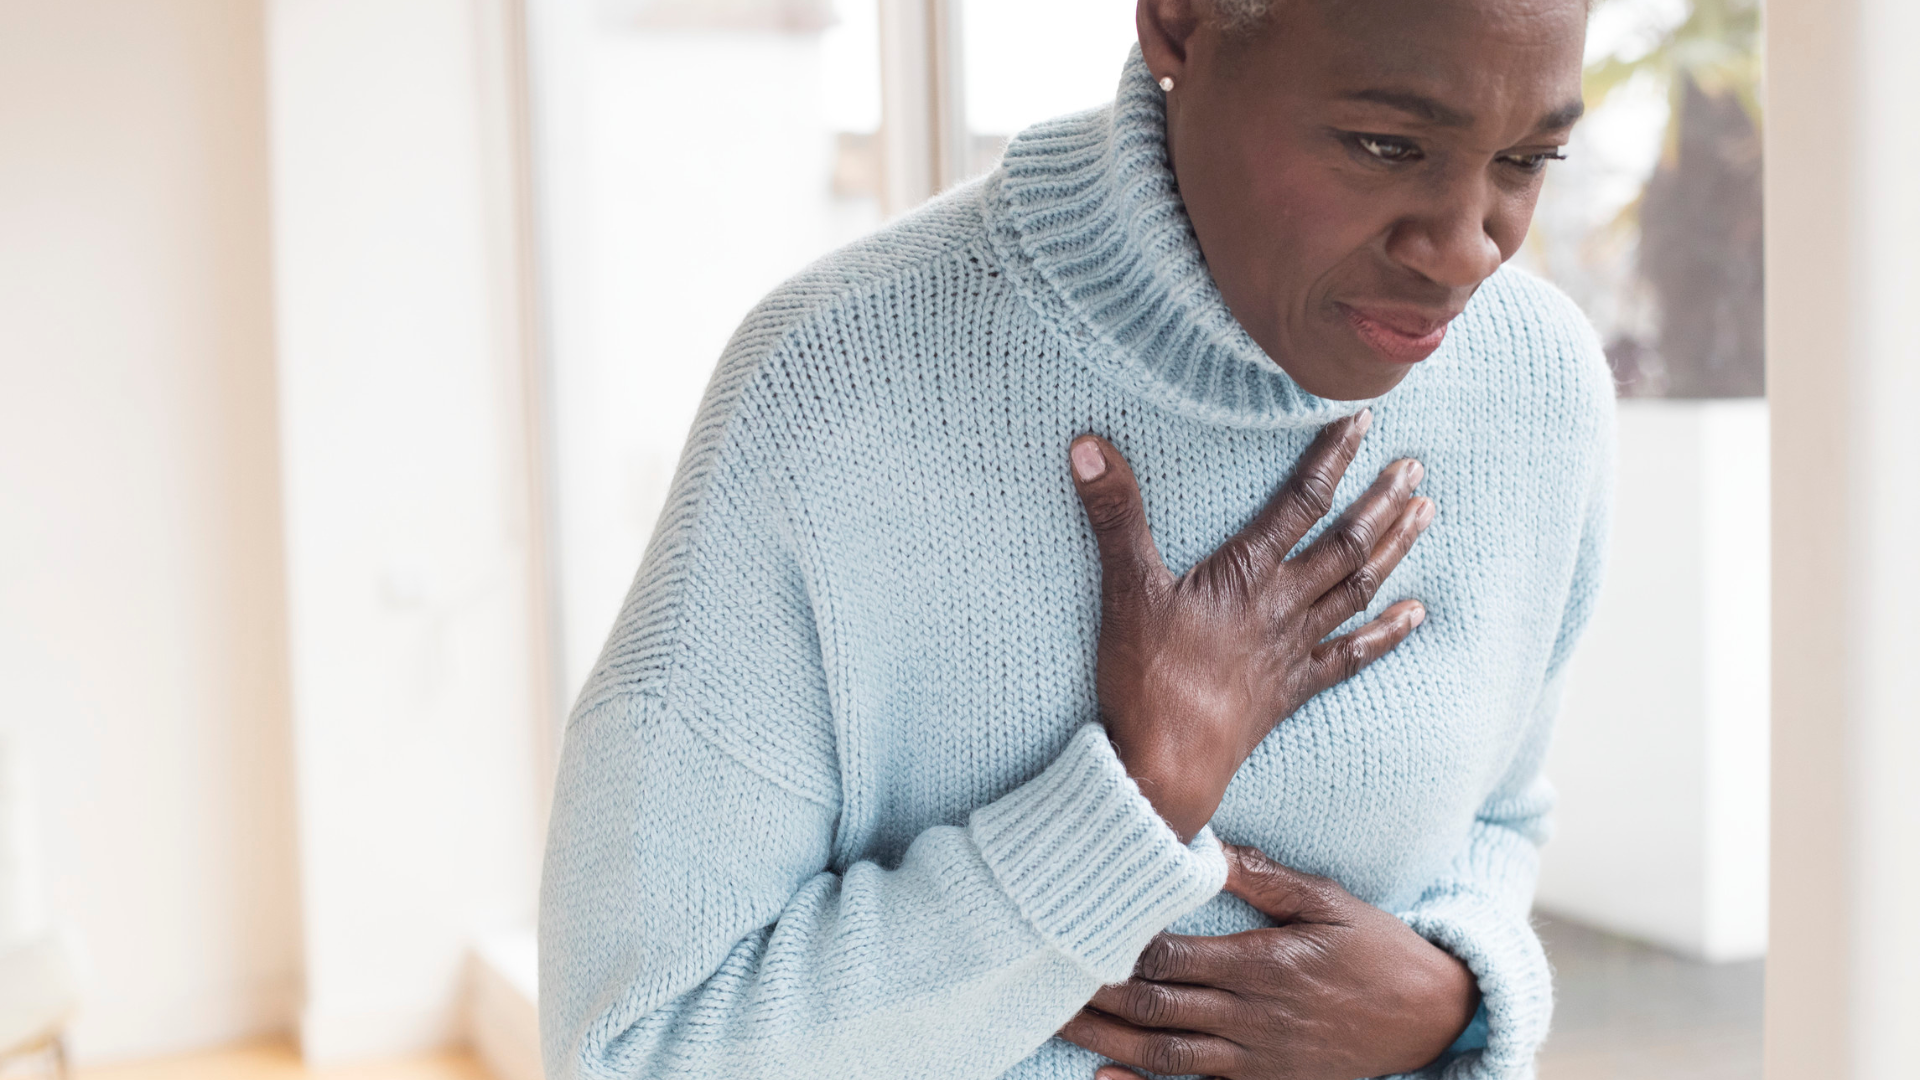 Burning Sensation in Chest: Causes, Symptoms and Treatment